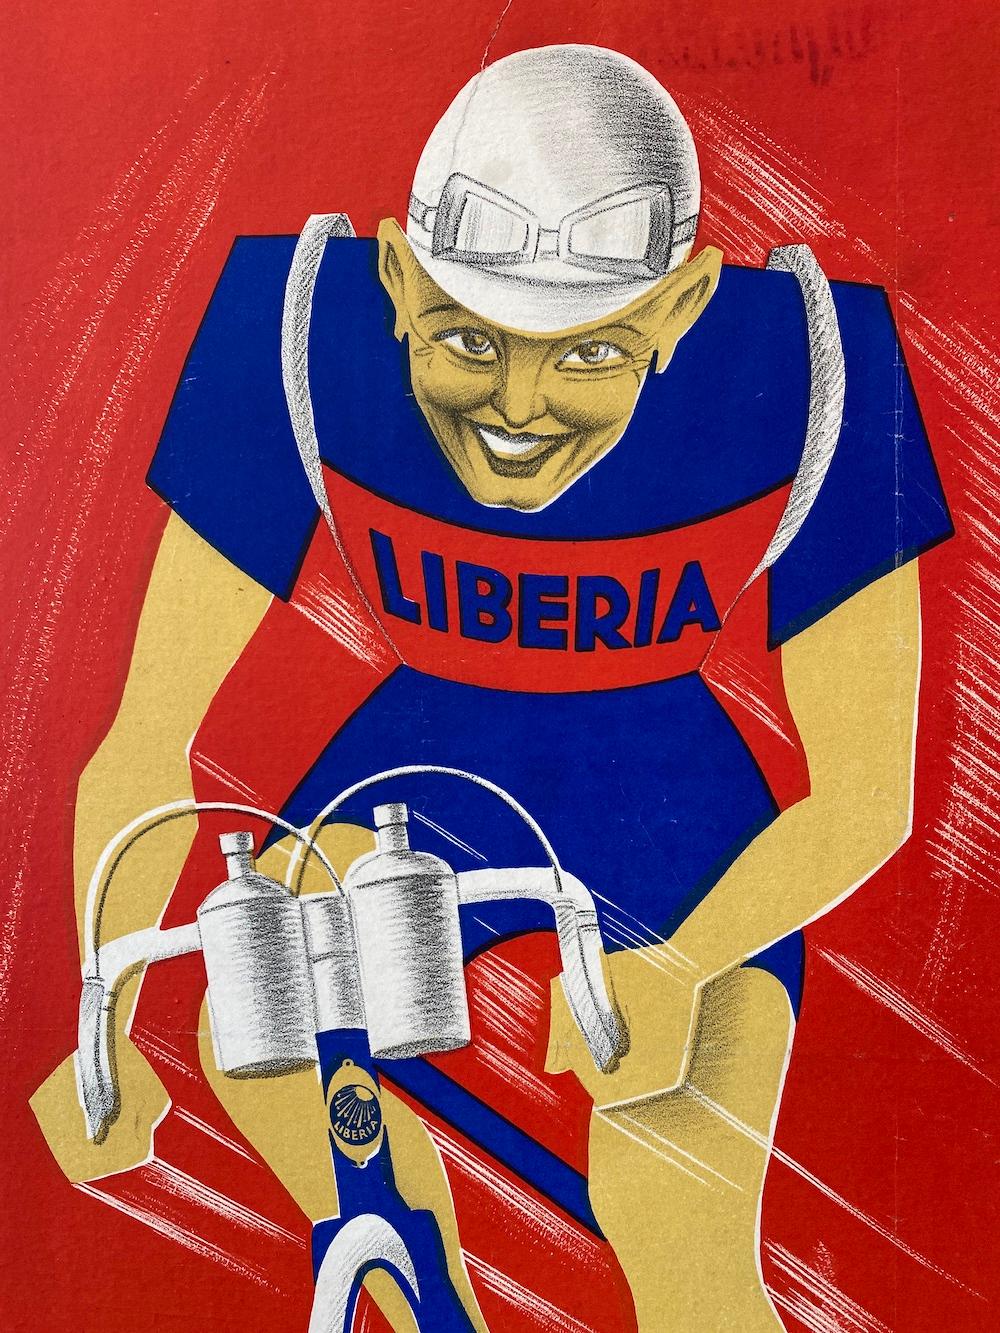 Art Deco Original Vintage Poster, 'LIBERIA CYCLING', 1934 

This is an original vintage poster from 1934 advertising the French road bike frame, Liberia. This poster is mounted onto linen, a common preservation technique.